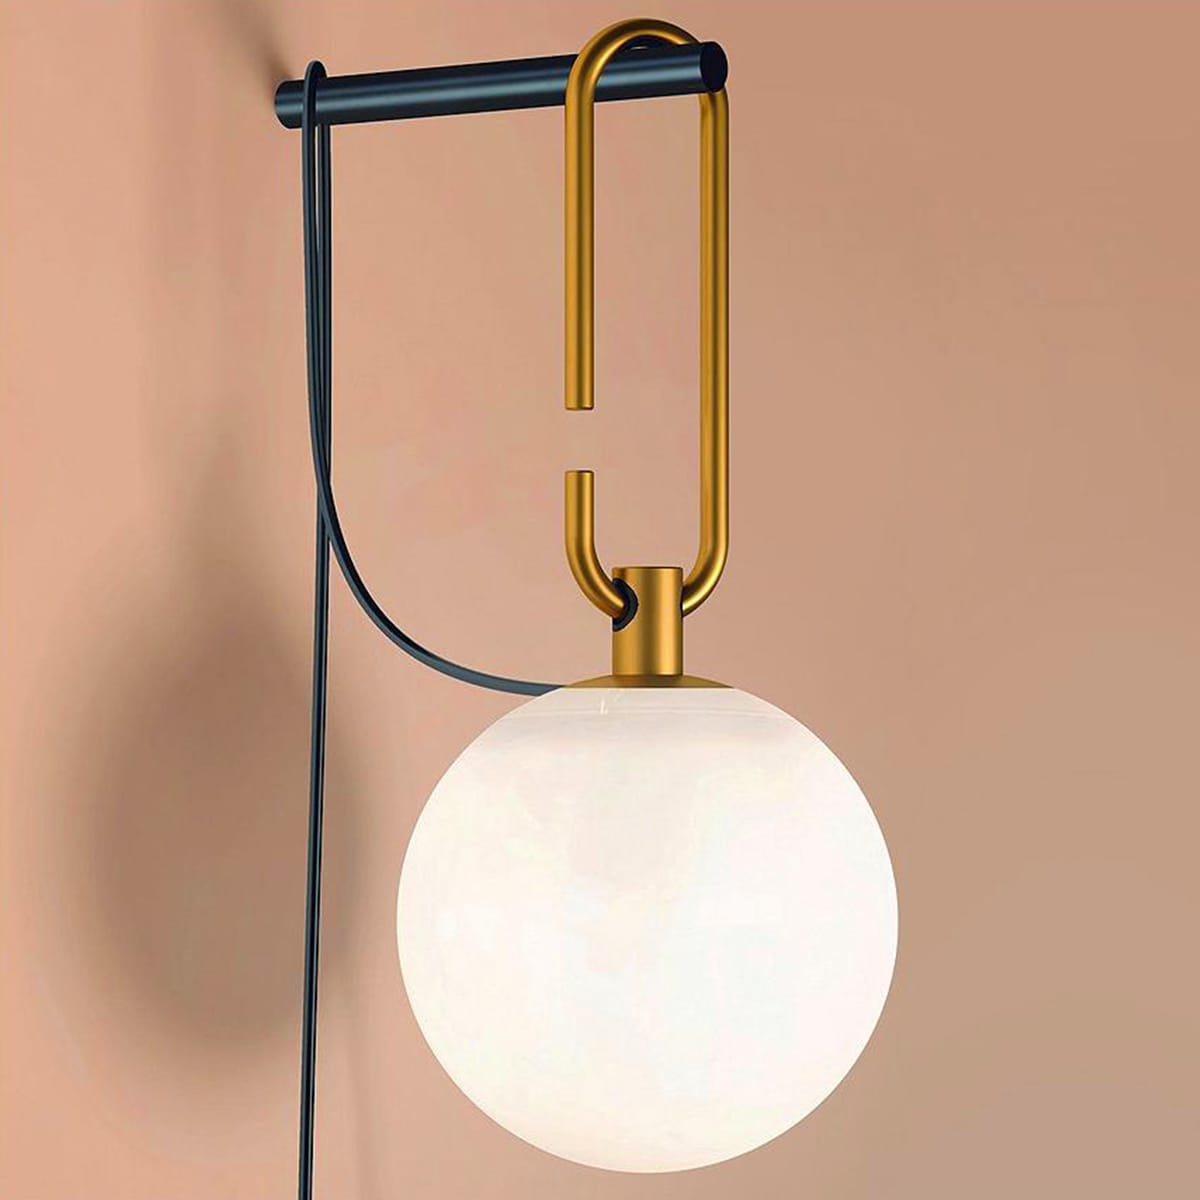 NH Wall Sconce by Artemide.